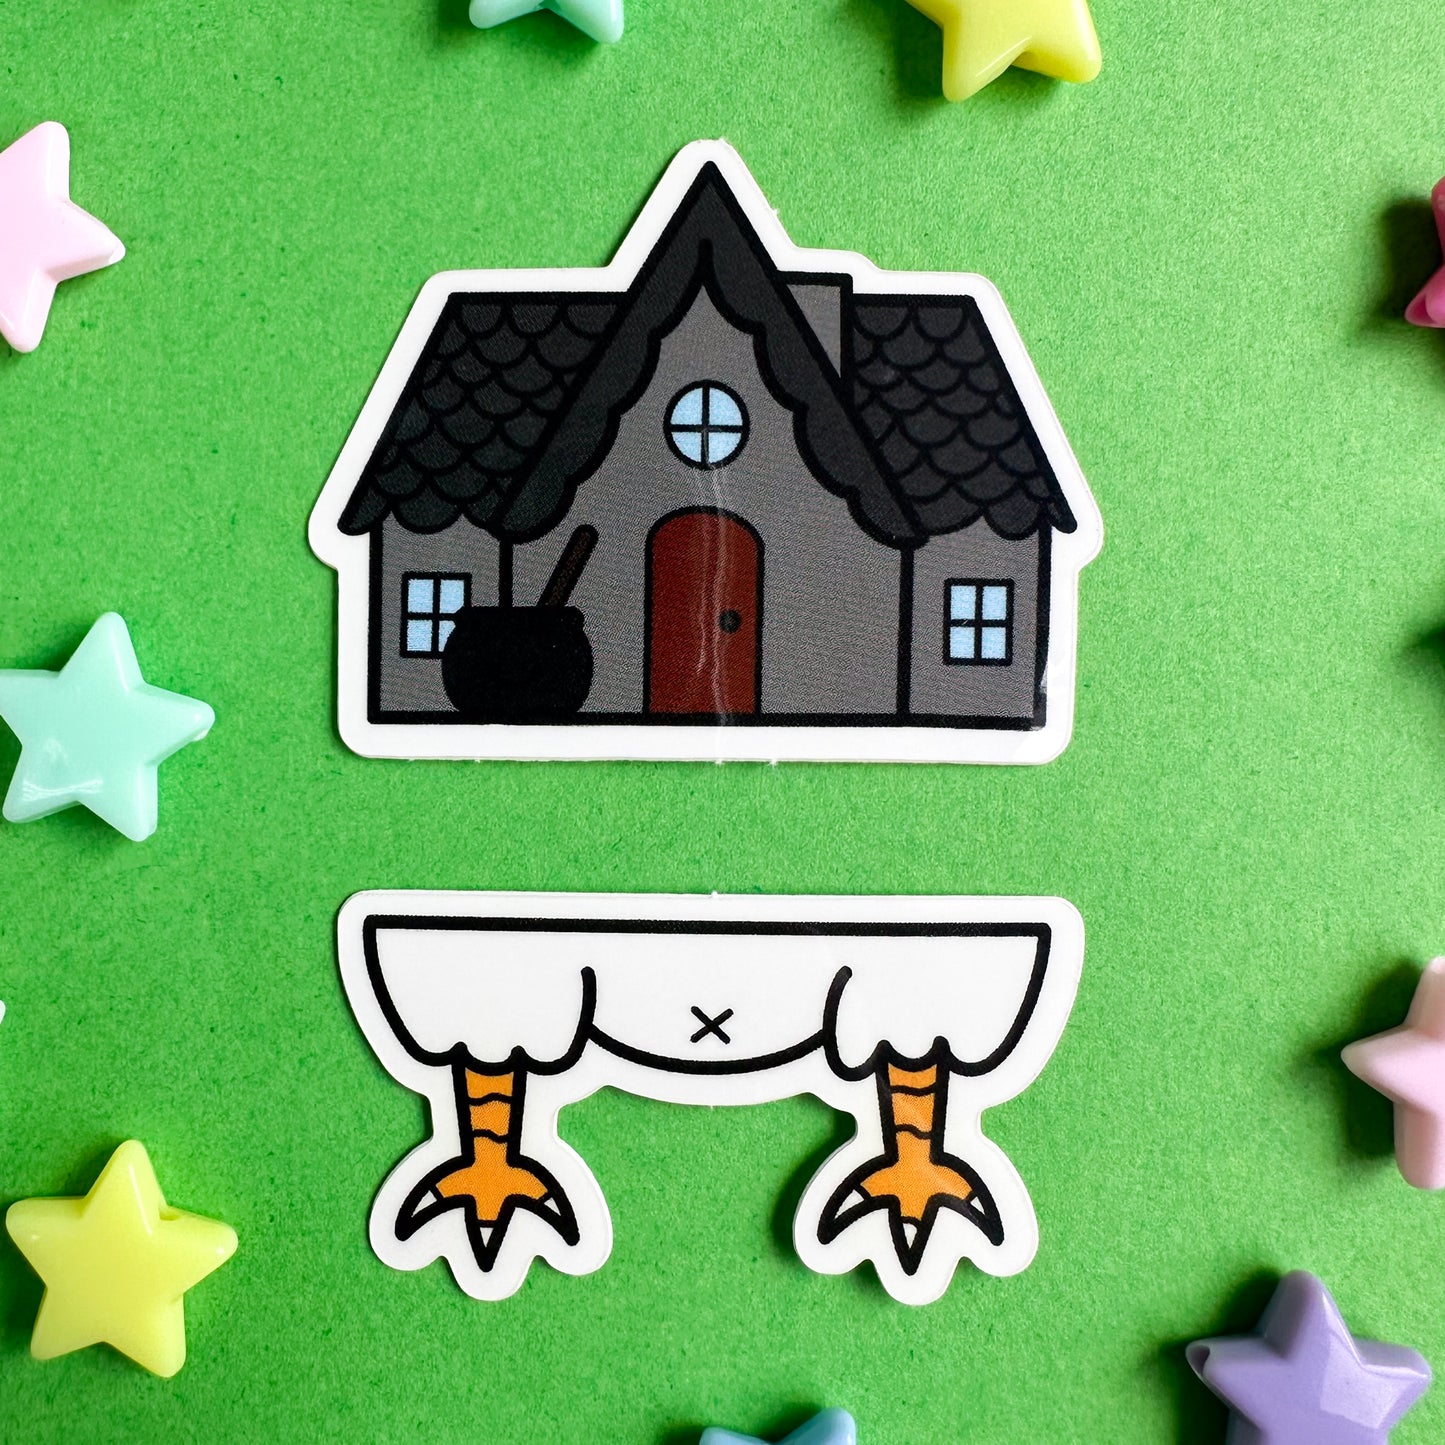 A sticker set that comes together to be Baba Yaga's house, the top sticker is a grey house with a peaked roof and a cauldron outside. The bottom sticker is a chicken butt. The stickers are sitting on a green background with plastic star beads around them. 